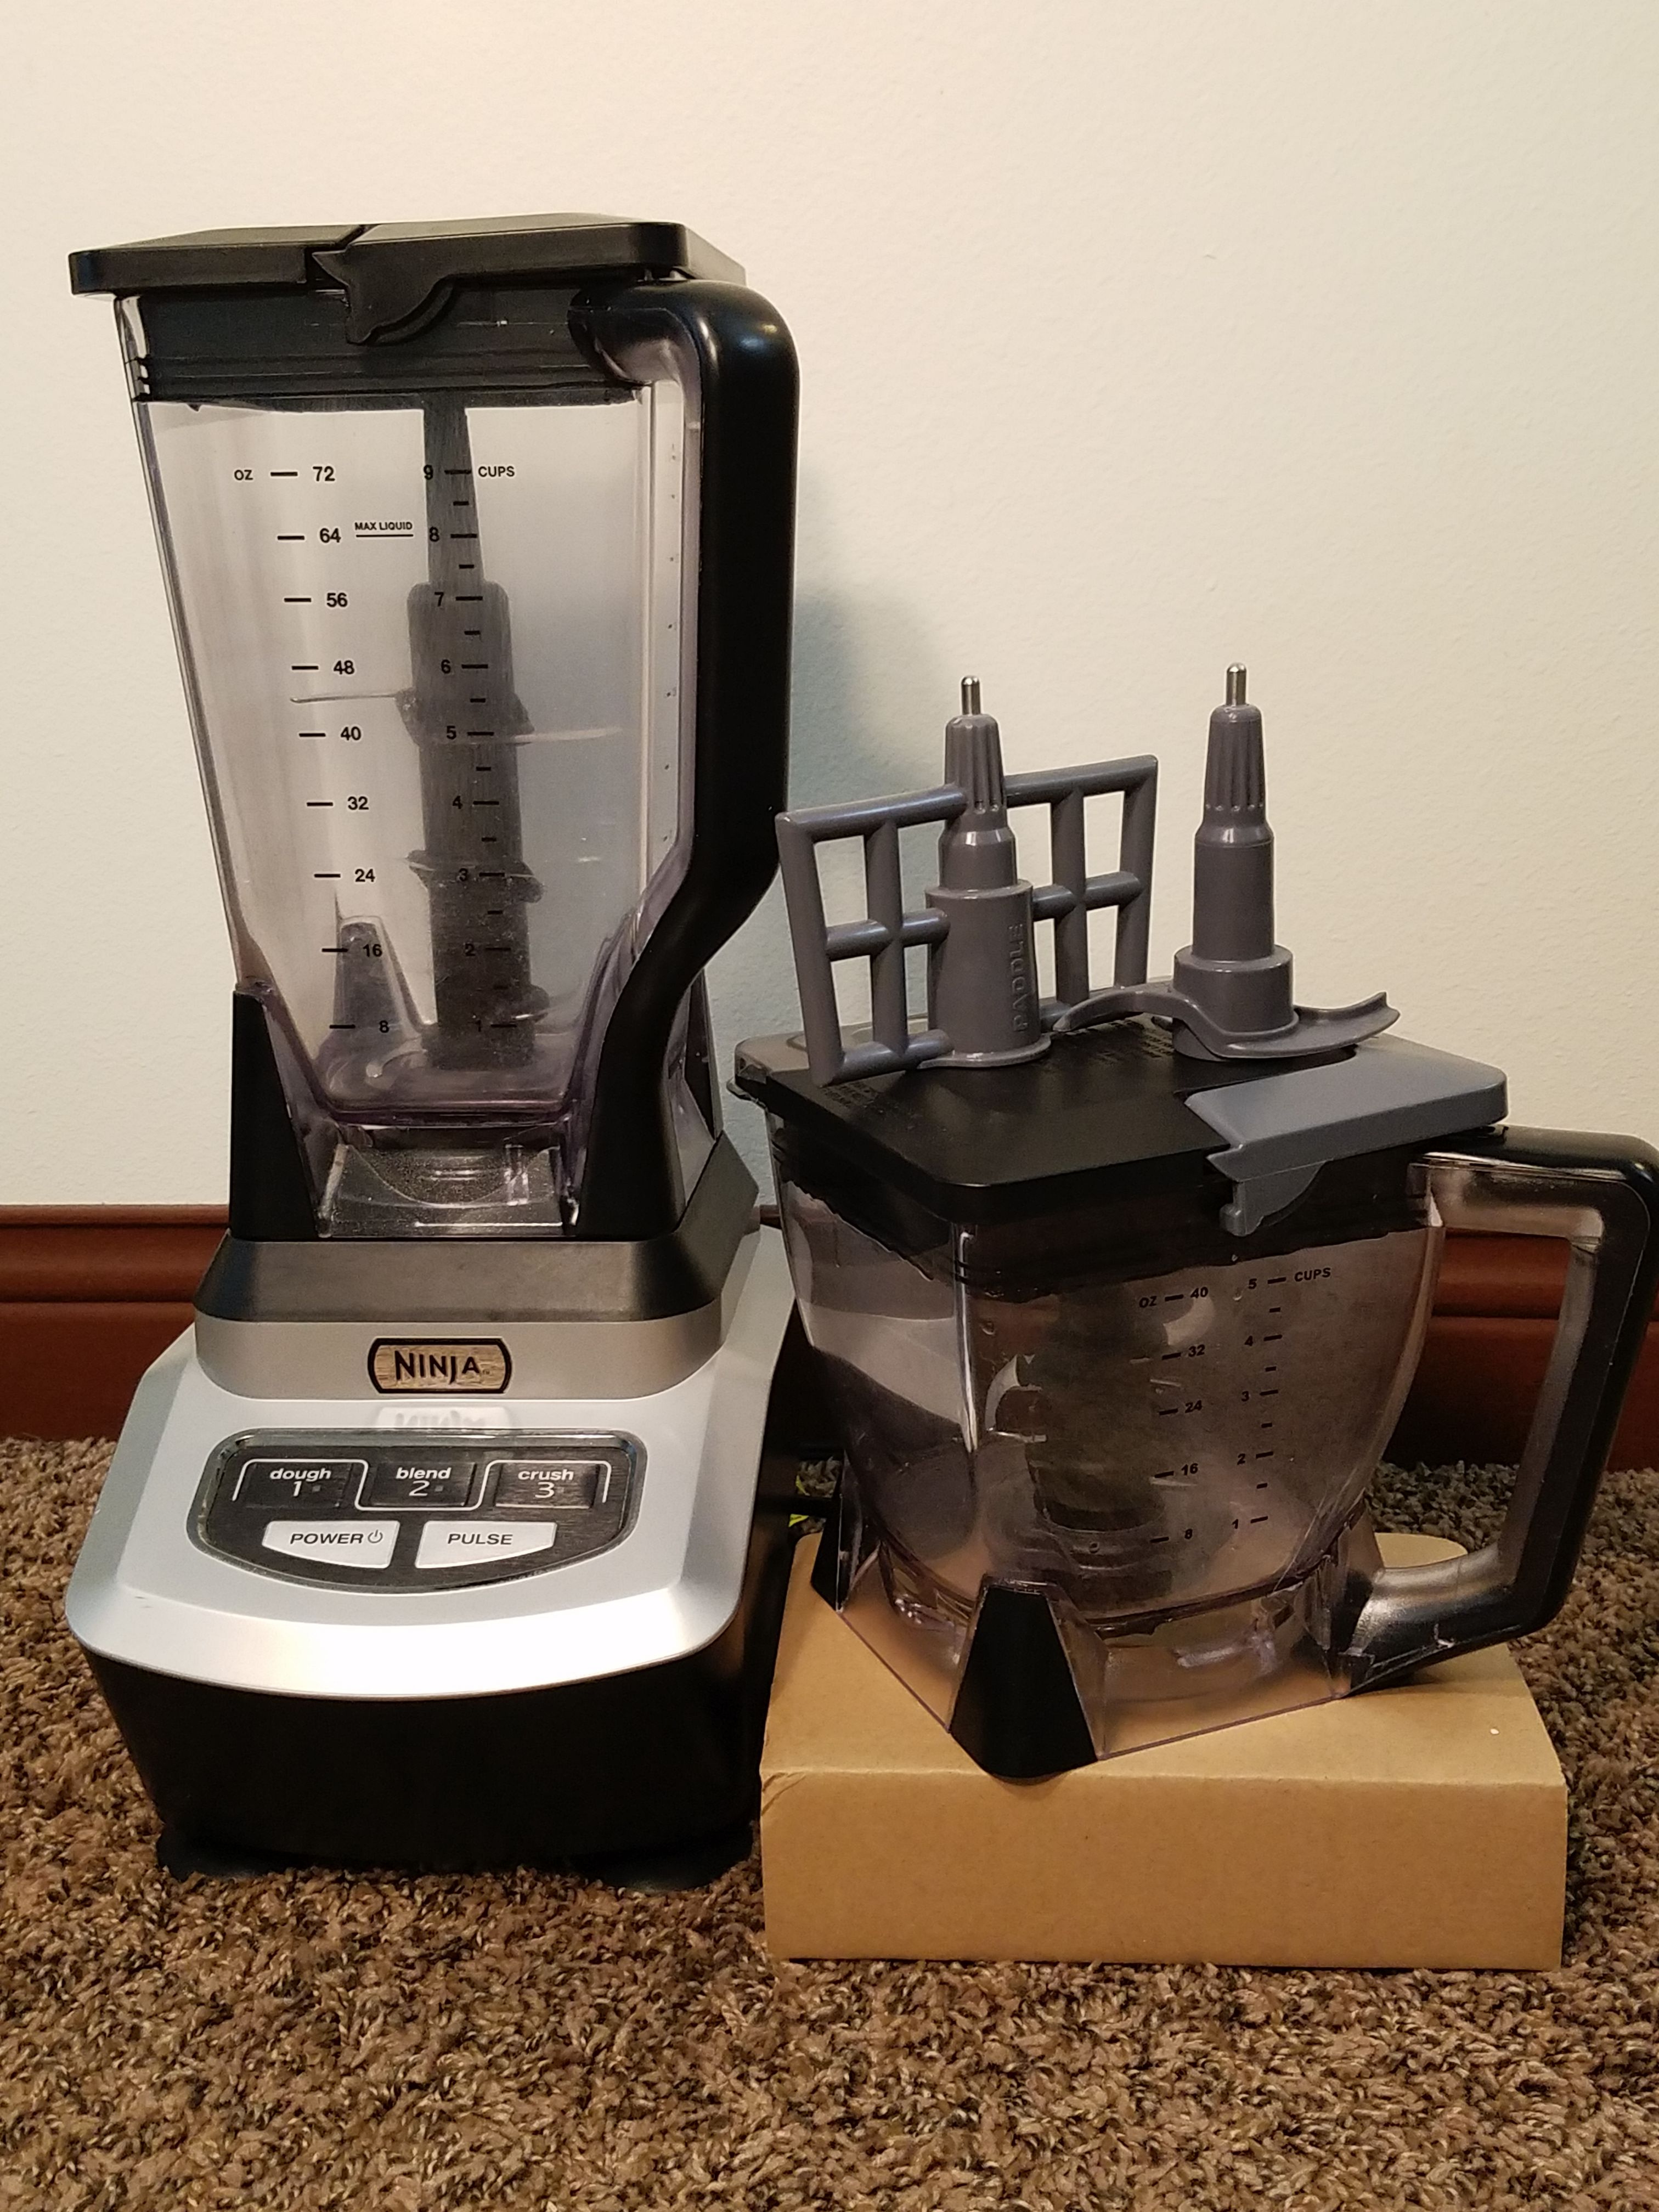 NINJA BL701WM30 3 in 1 Blender with 72 oz PITCHER with 40-ounce